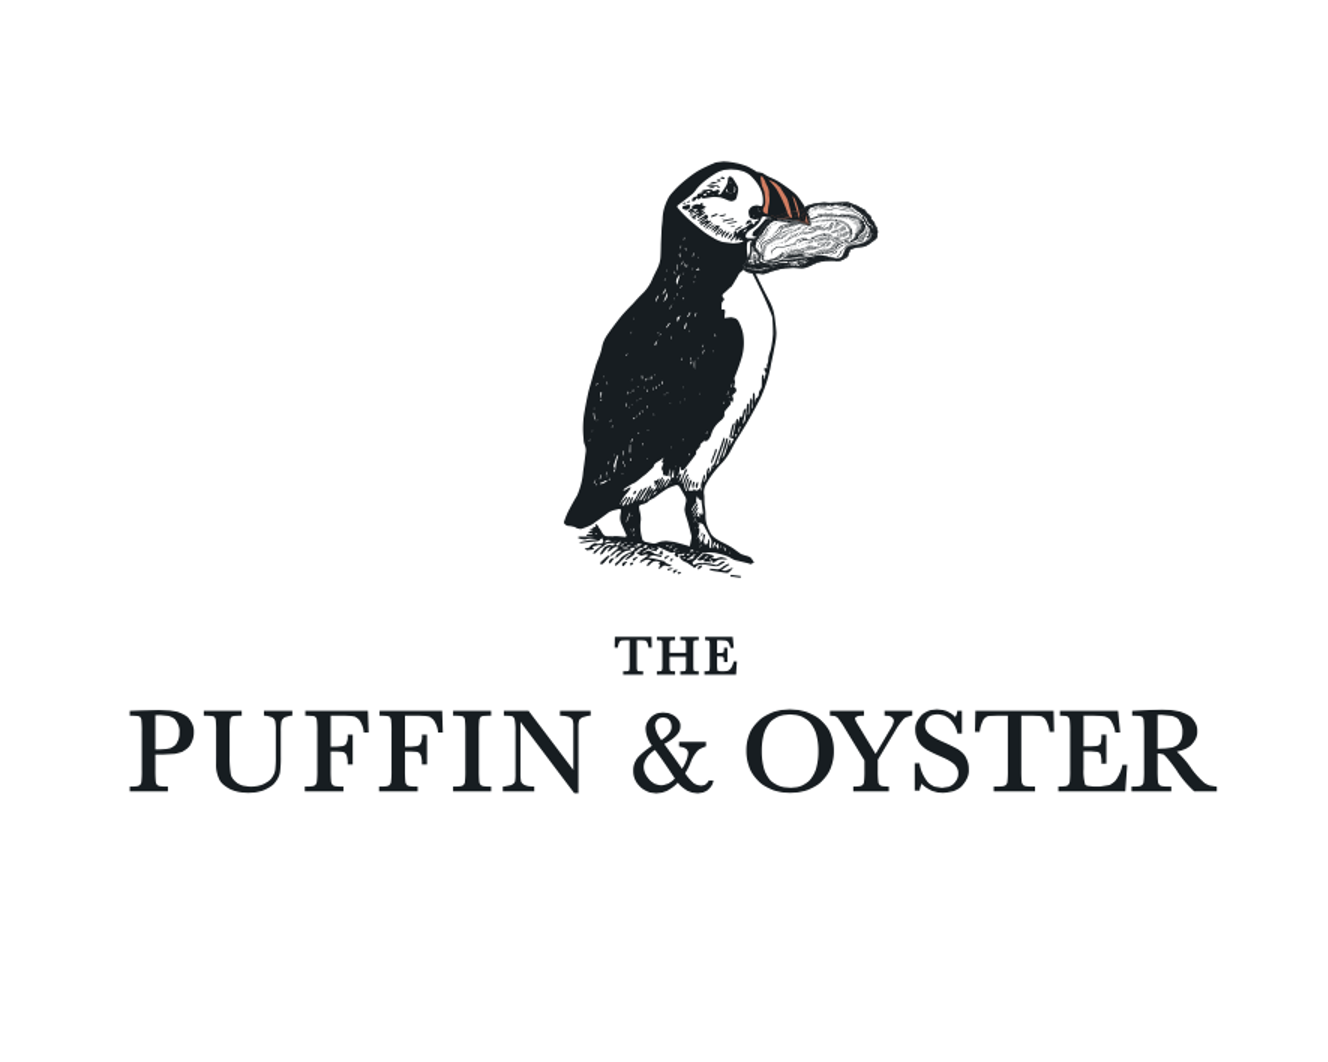 The Puffin & Oyster